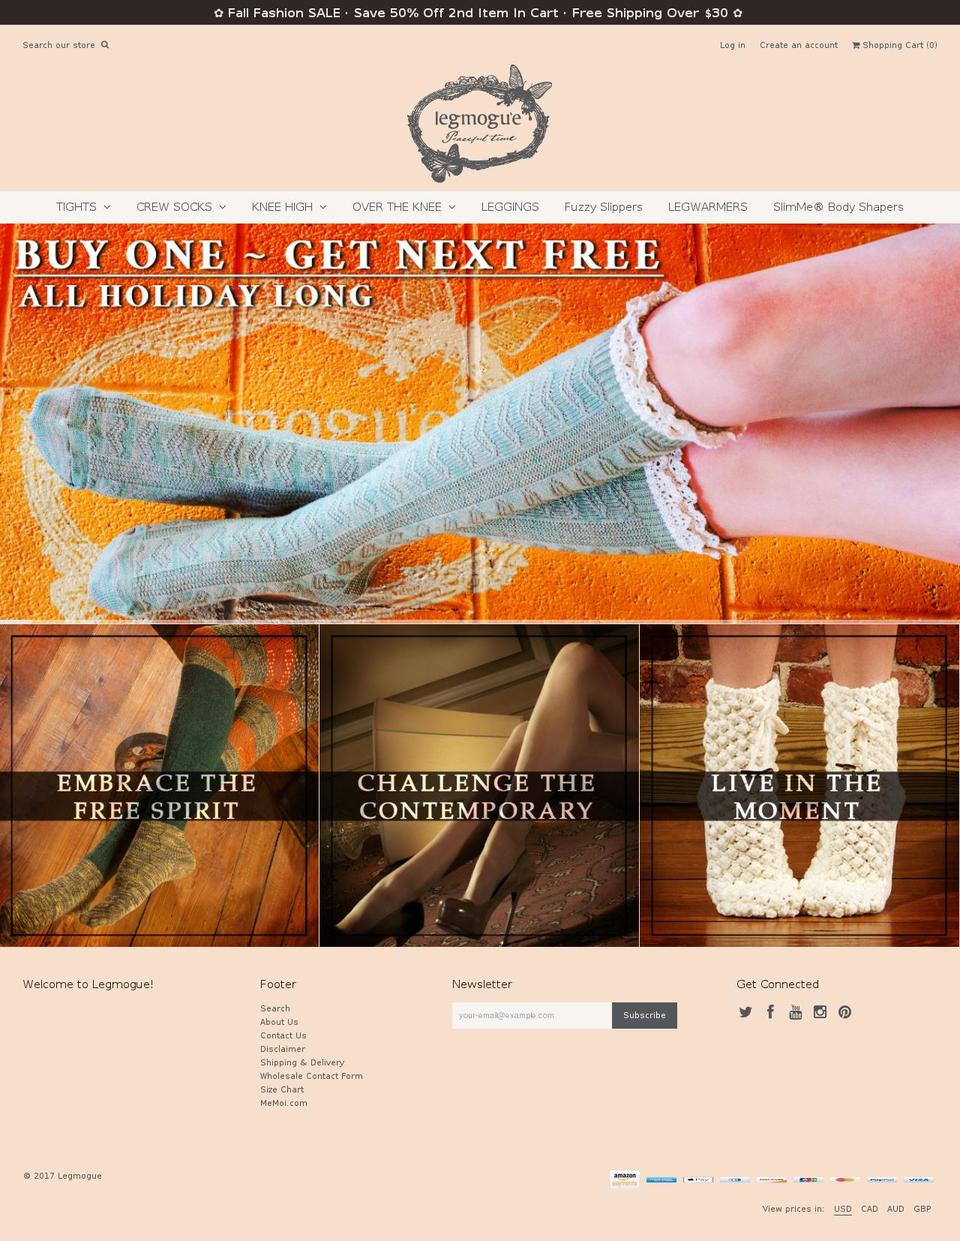 Weekend Shopify theme site example legmogue.info